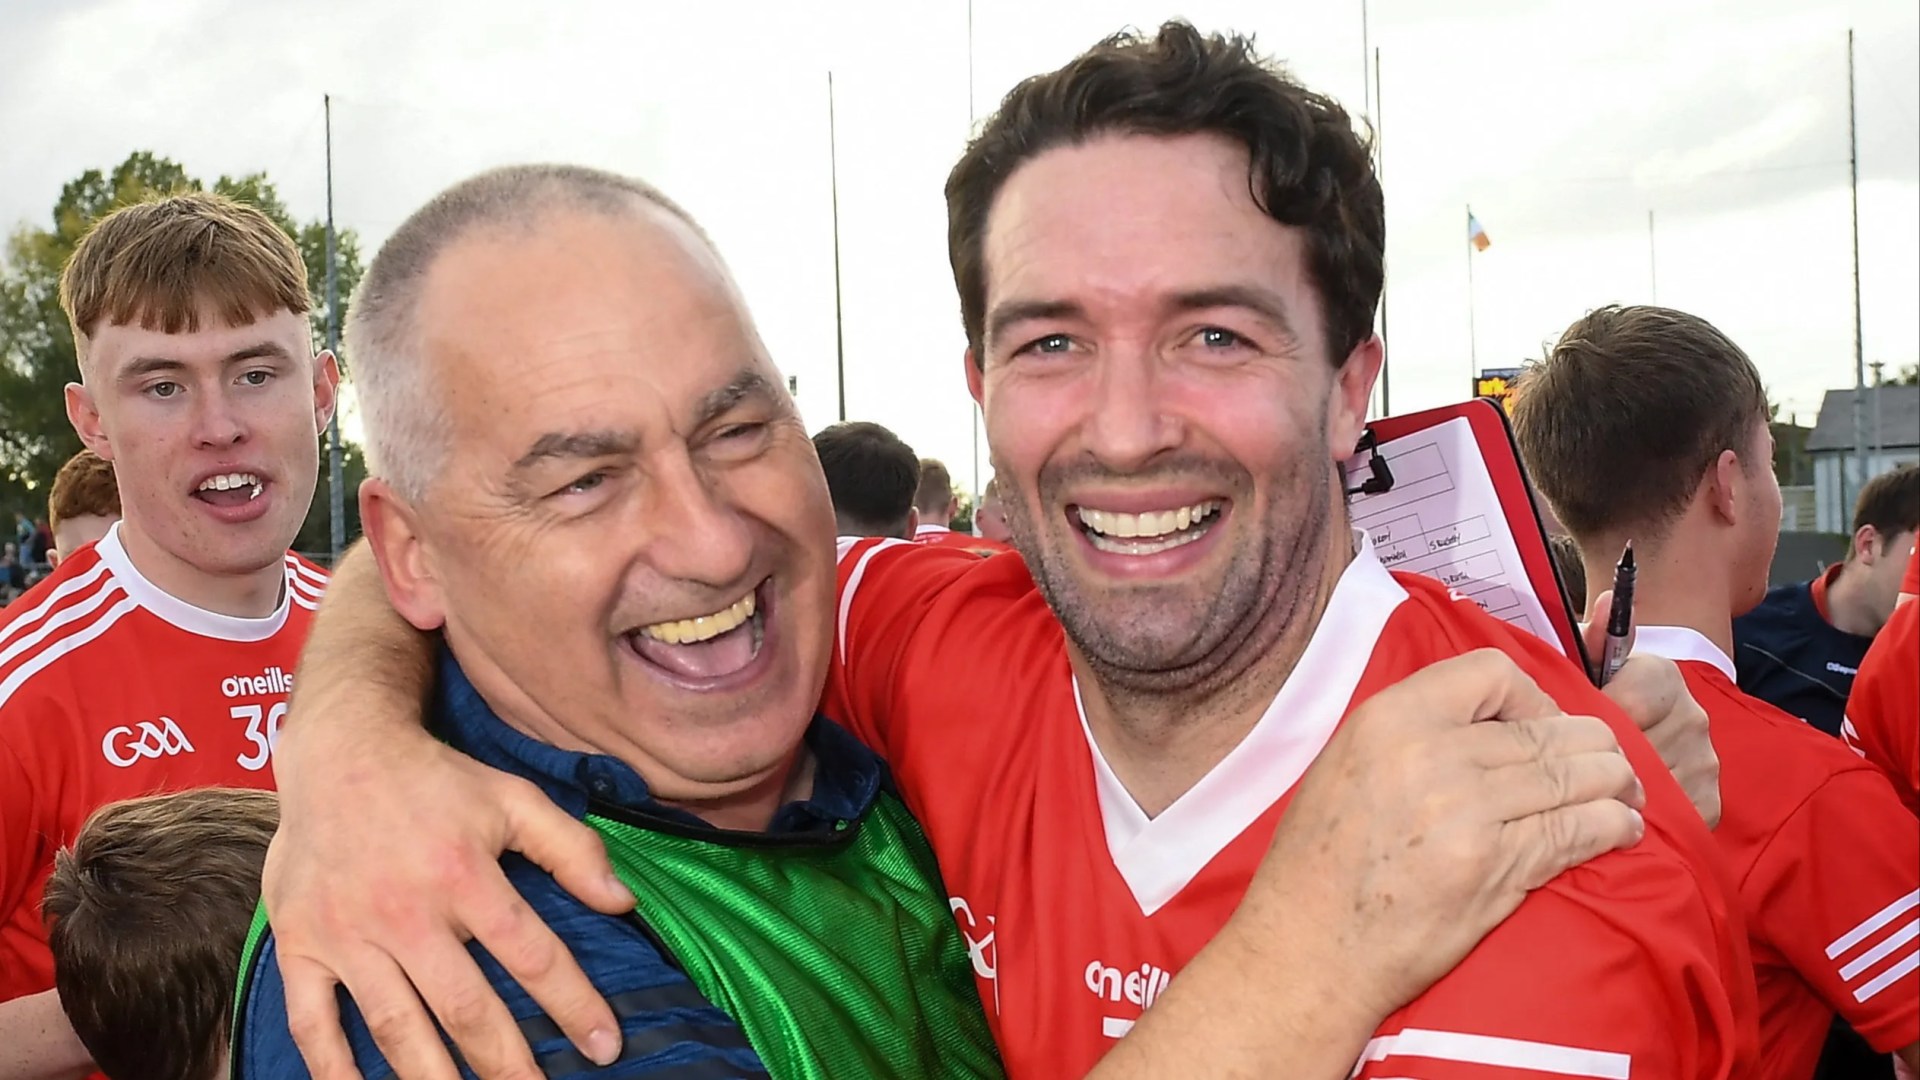 Eire Og boss Turlough O’Brien says there’s nothing like managing his own club